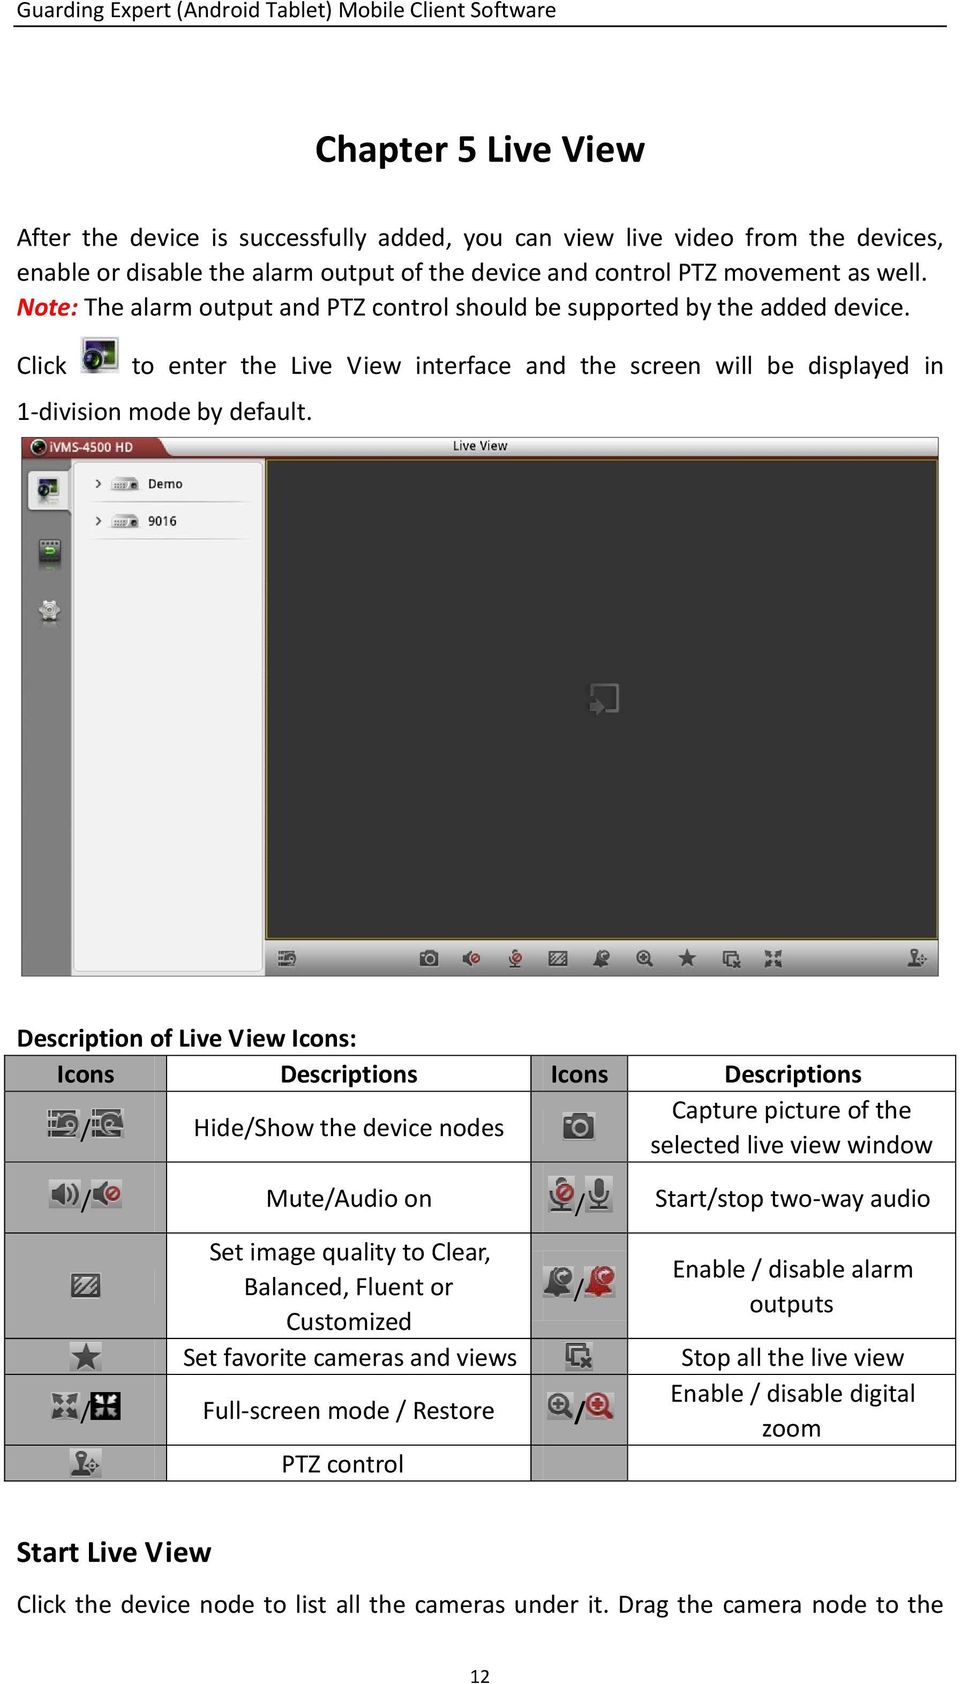 Description of Live View Icons: Icons Descriptions Icons Descriptions Capture picture of the / Hide/Show the device nodes selected live view window / Mute/Audio on / Start/stop two-way audio Set